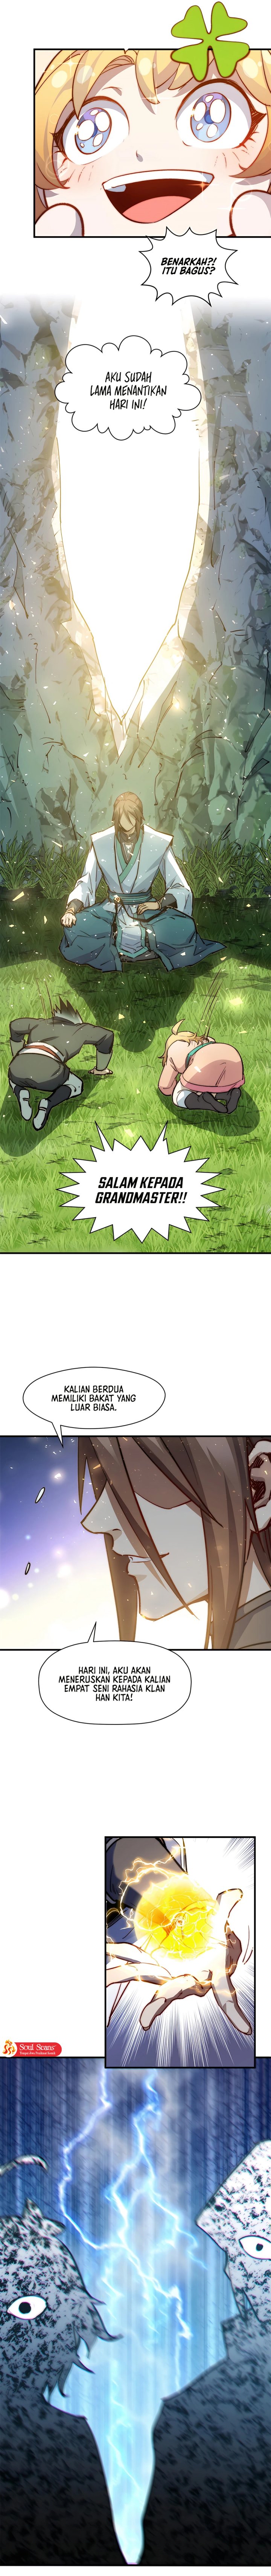 Dilarang COPAS - situs resmi www.mangacanblog.com - Komik top tier providence secretly cultivate for a thousand years 132 - chapter 132 133 Indonesia top tier providence secretly cultivate for a thousand years 132 - chapter 132 Terbaru 13|Baca Manga Komik Indonesia|Mangacan